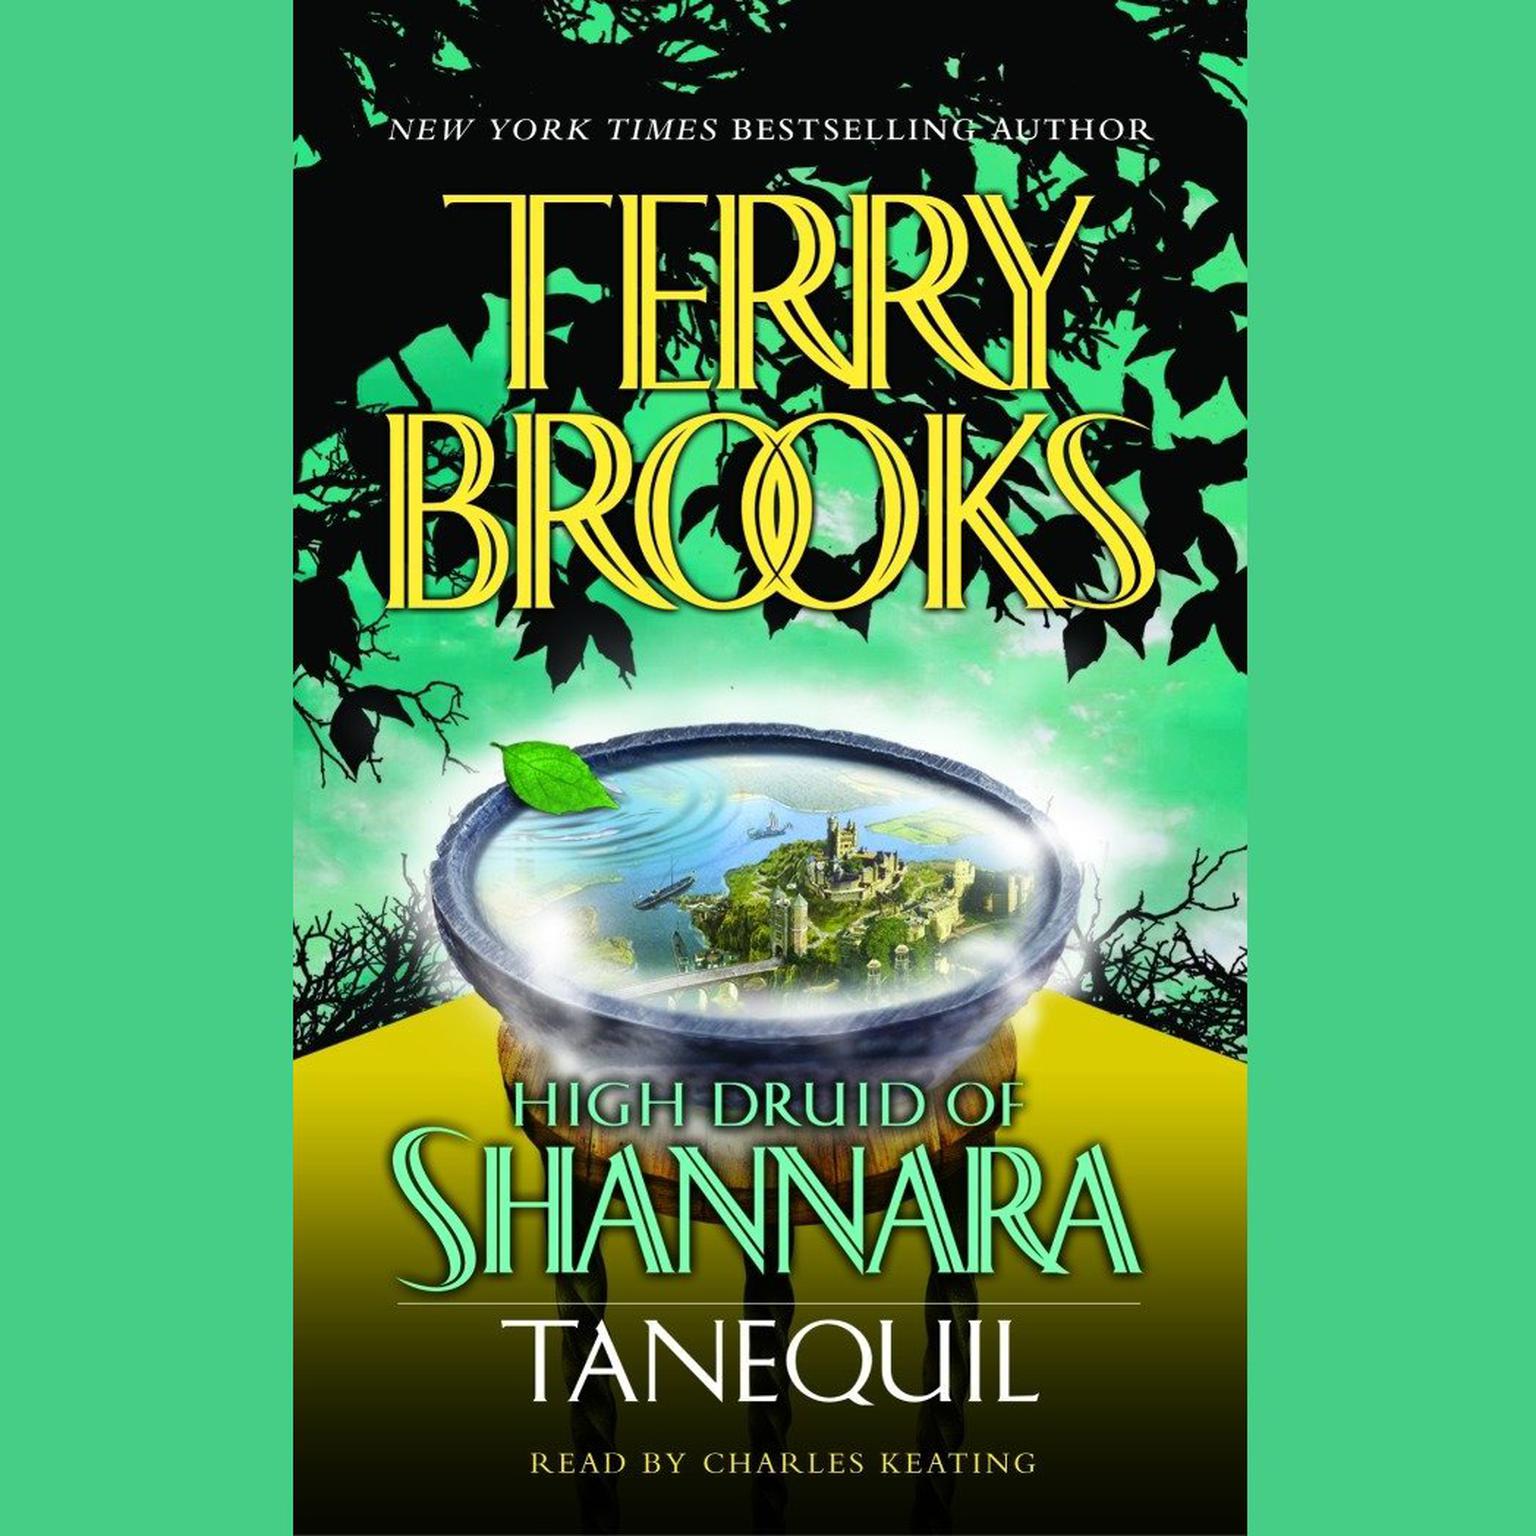 High Druid of Shannara: Tanequil (Abridged) Audiobook, by Terry Brooks